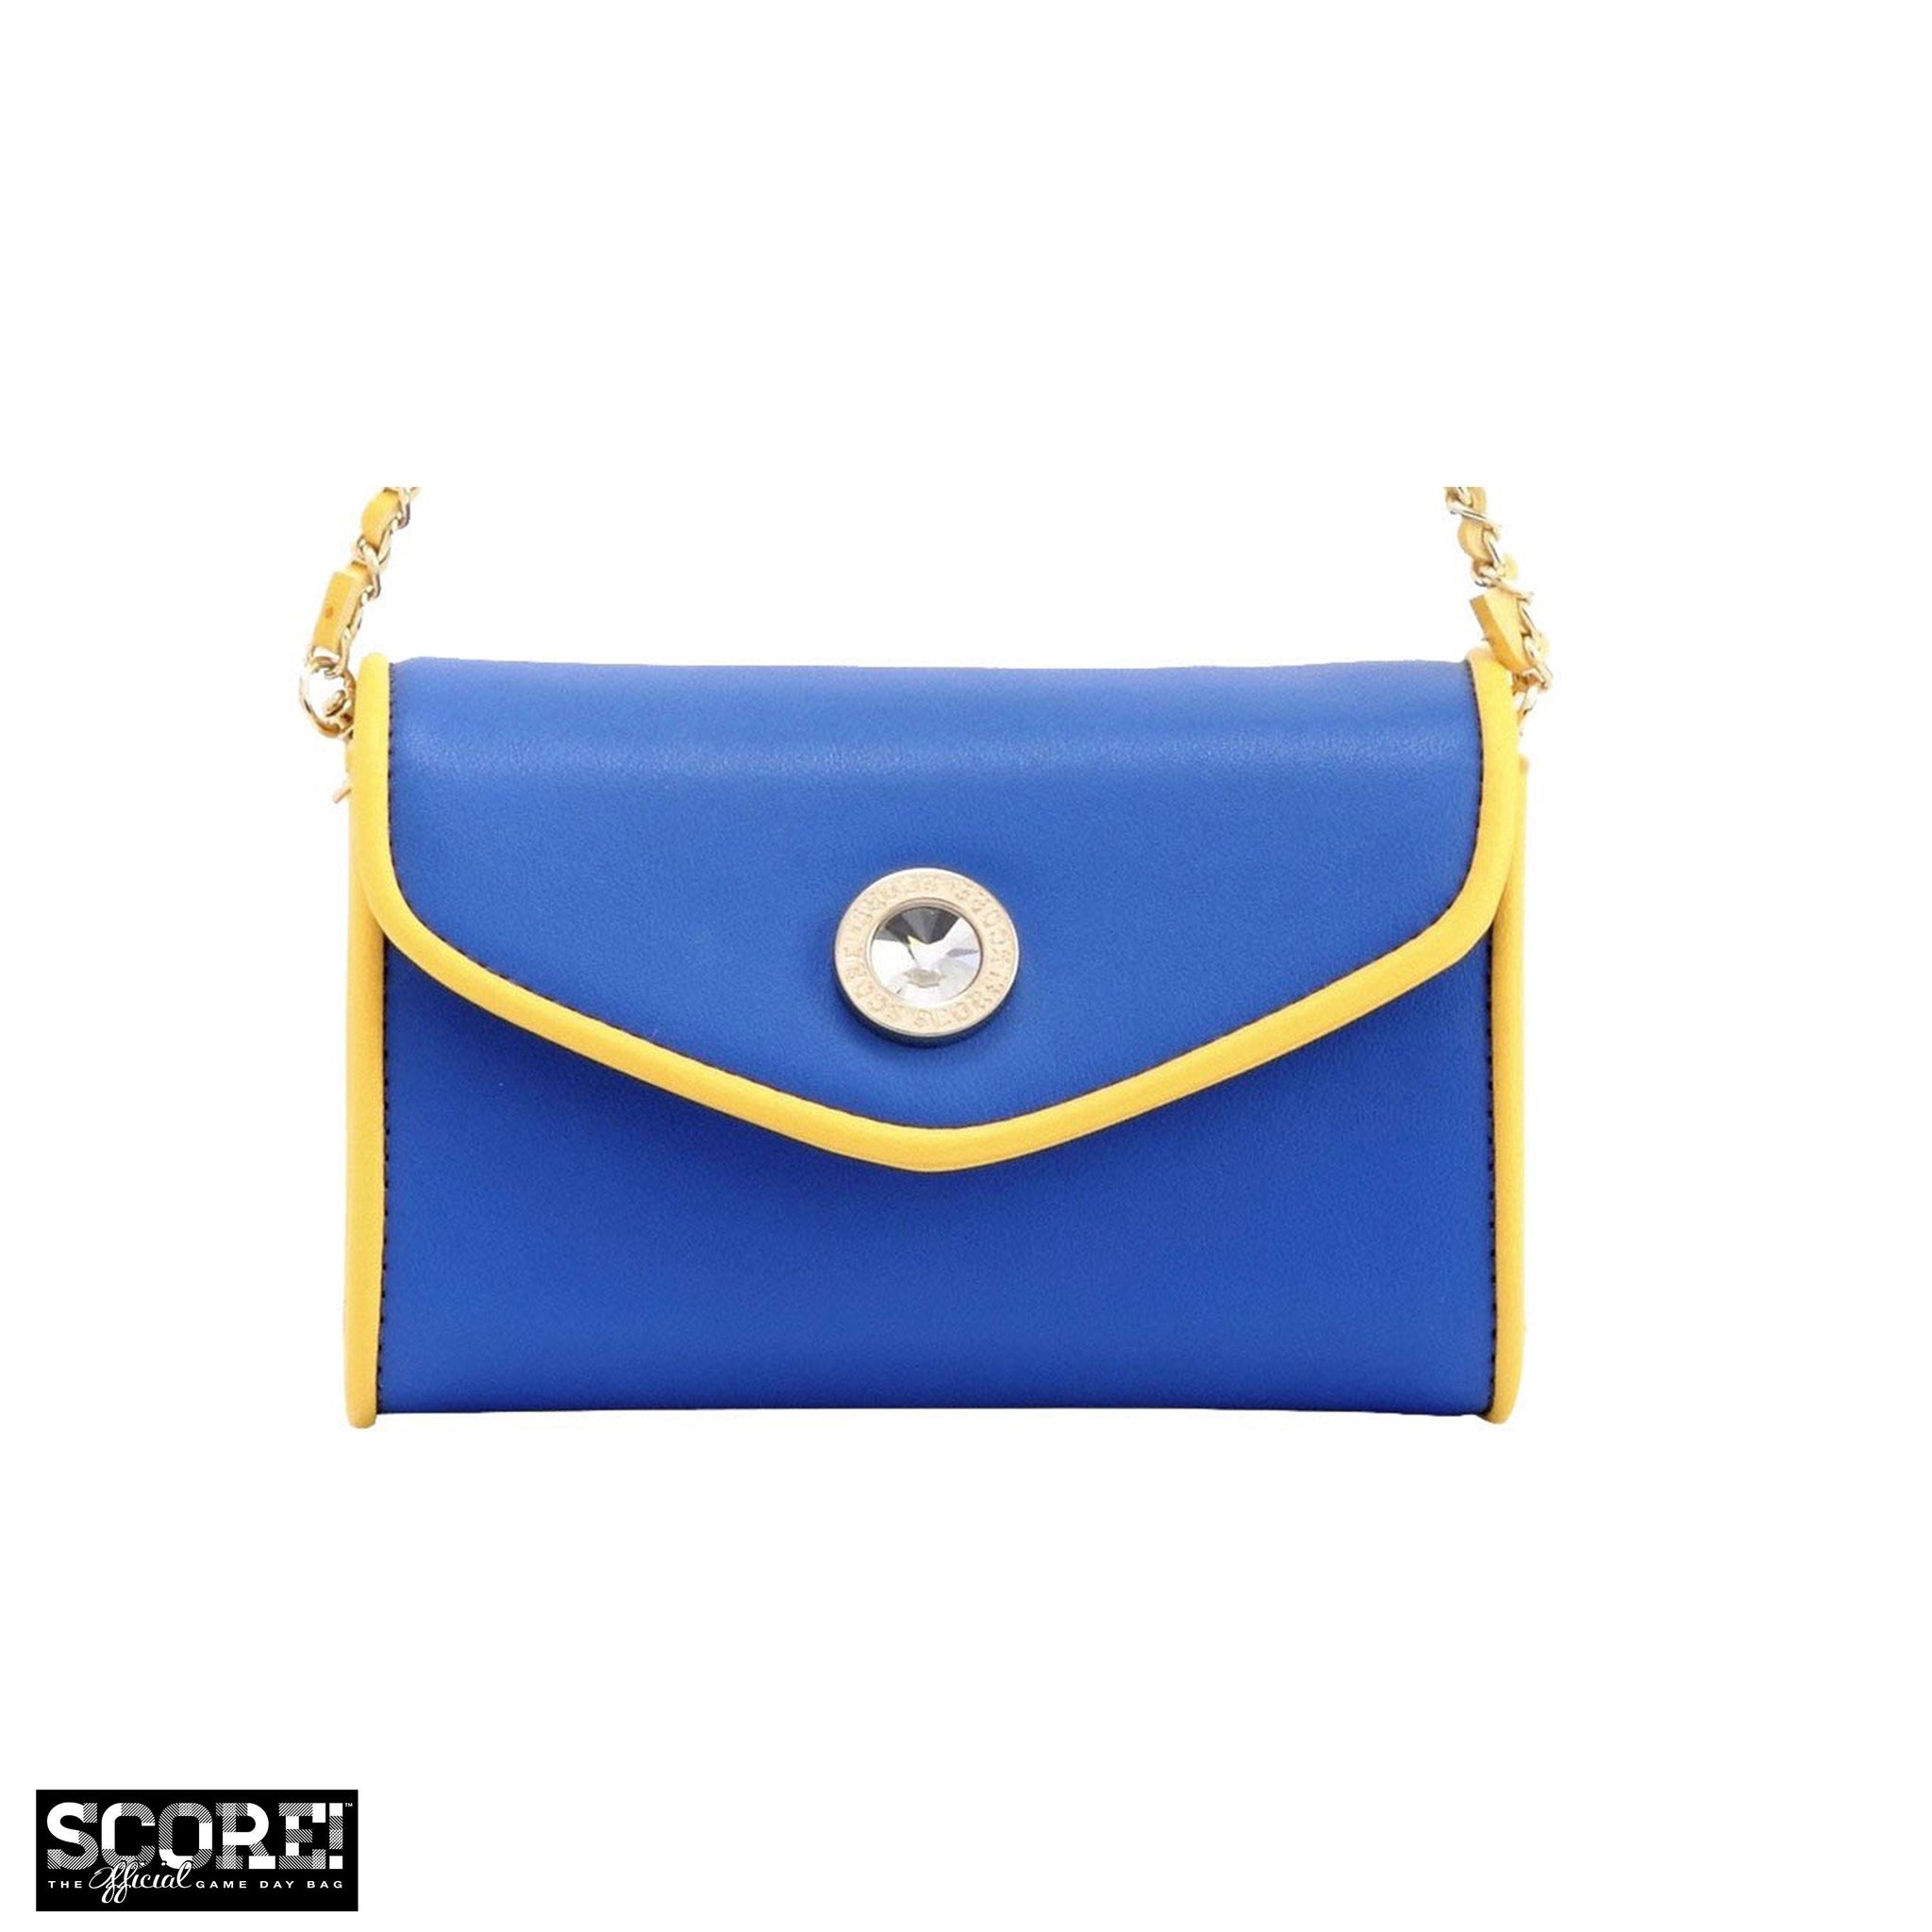 Designer Clutch Bags & Leather Crossbody Pouches